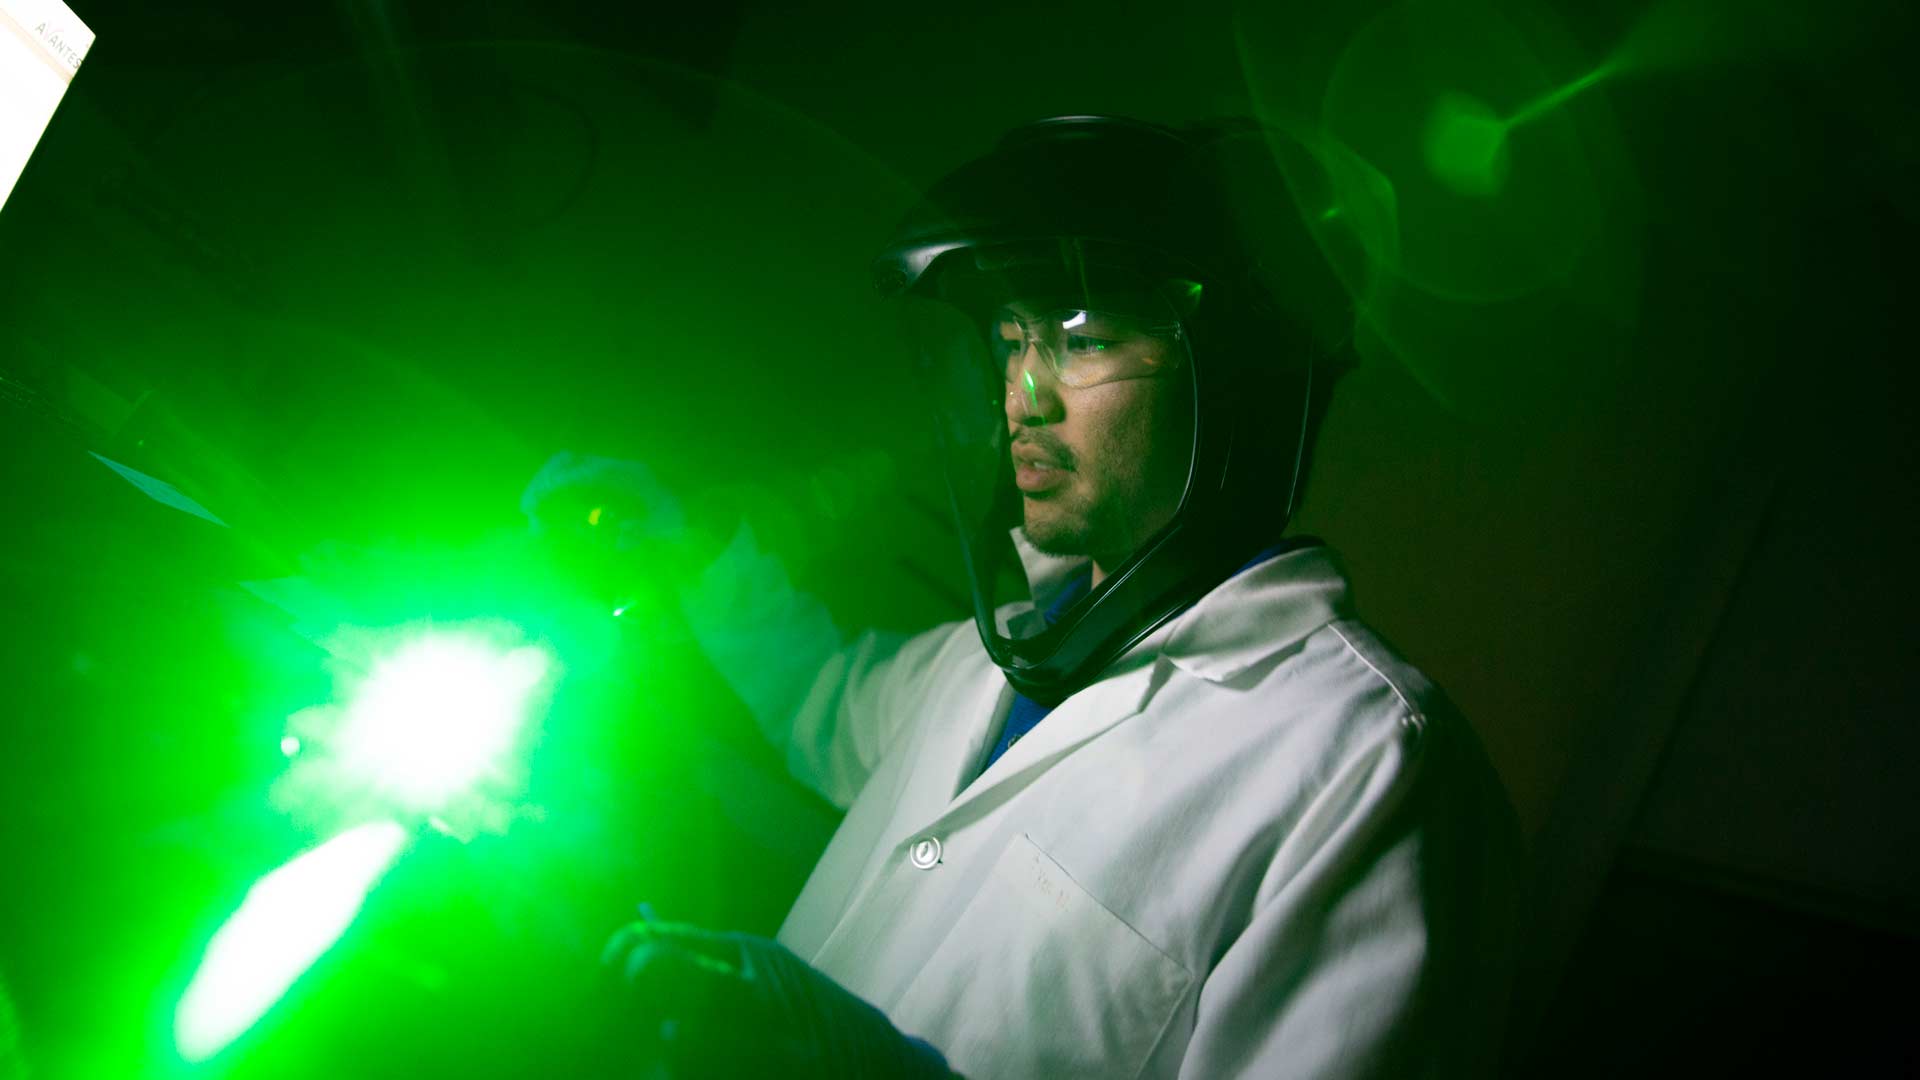 graduate student working in lab with green light